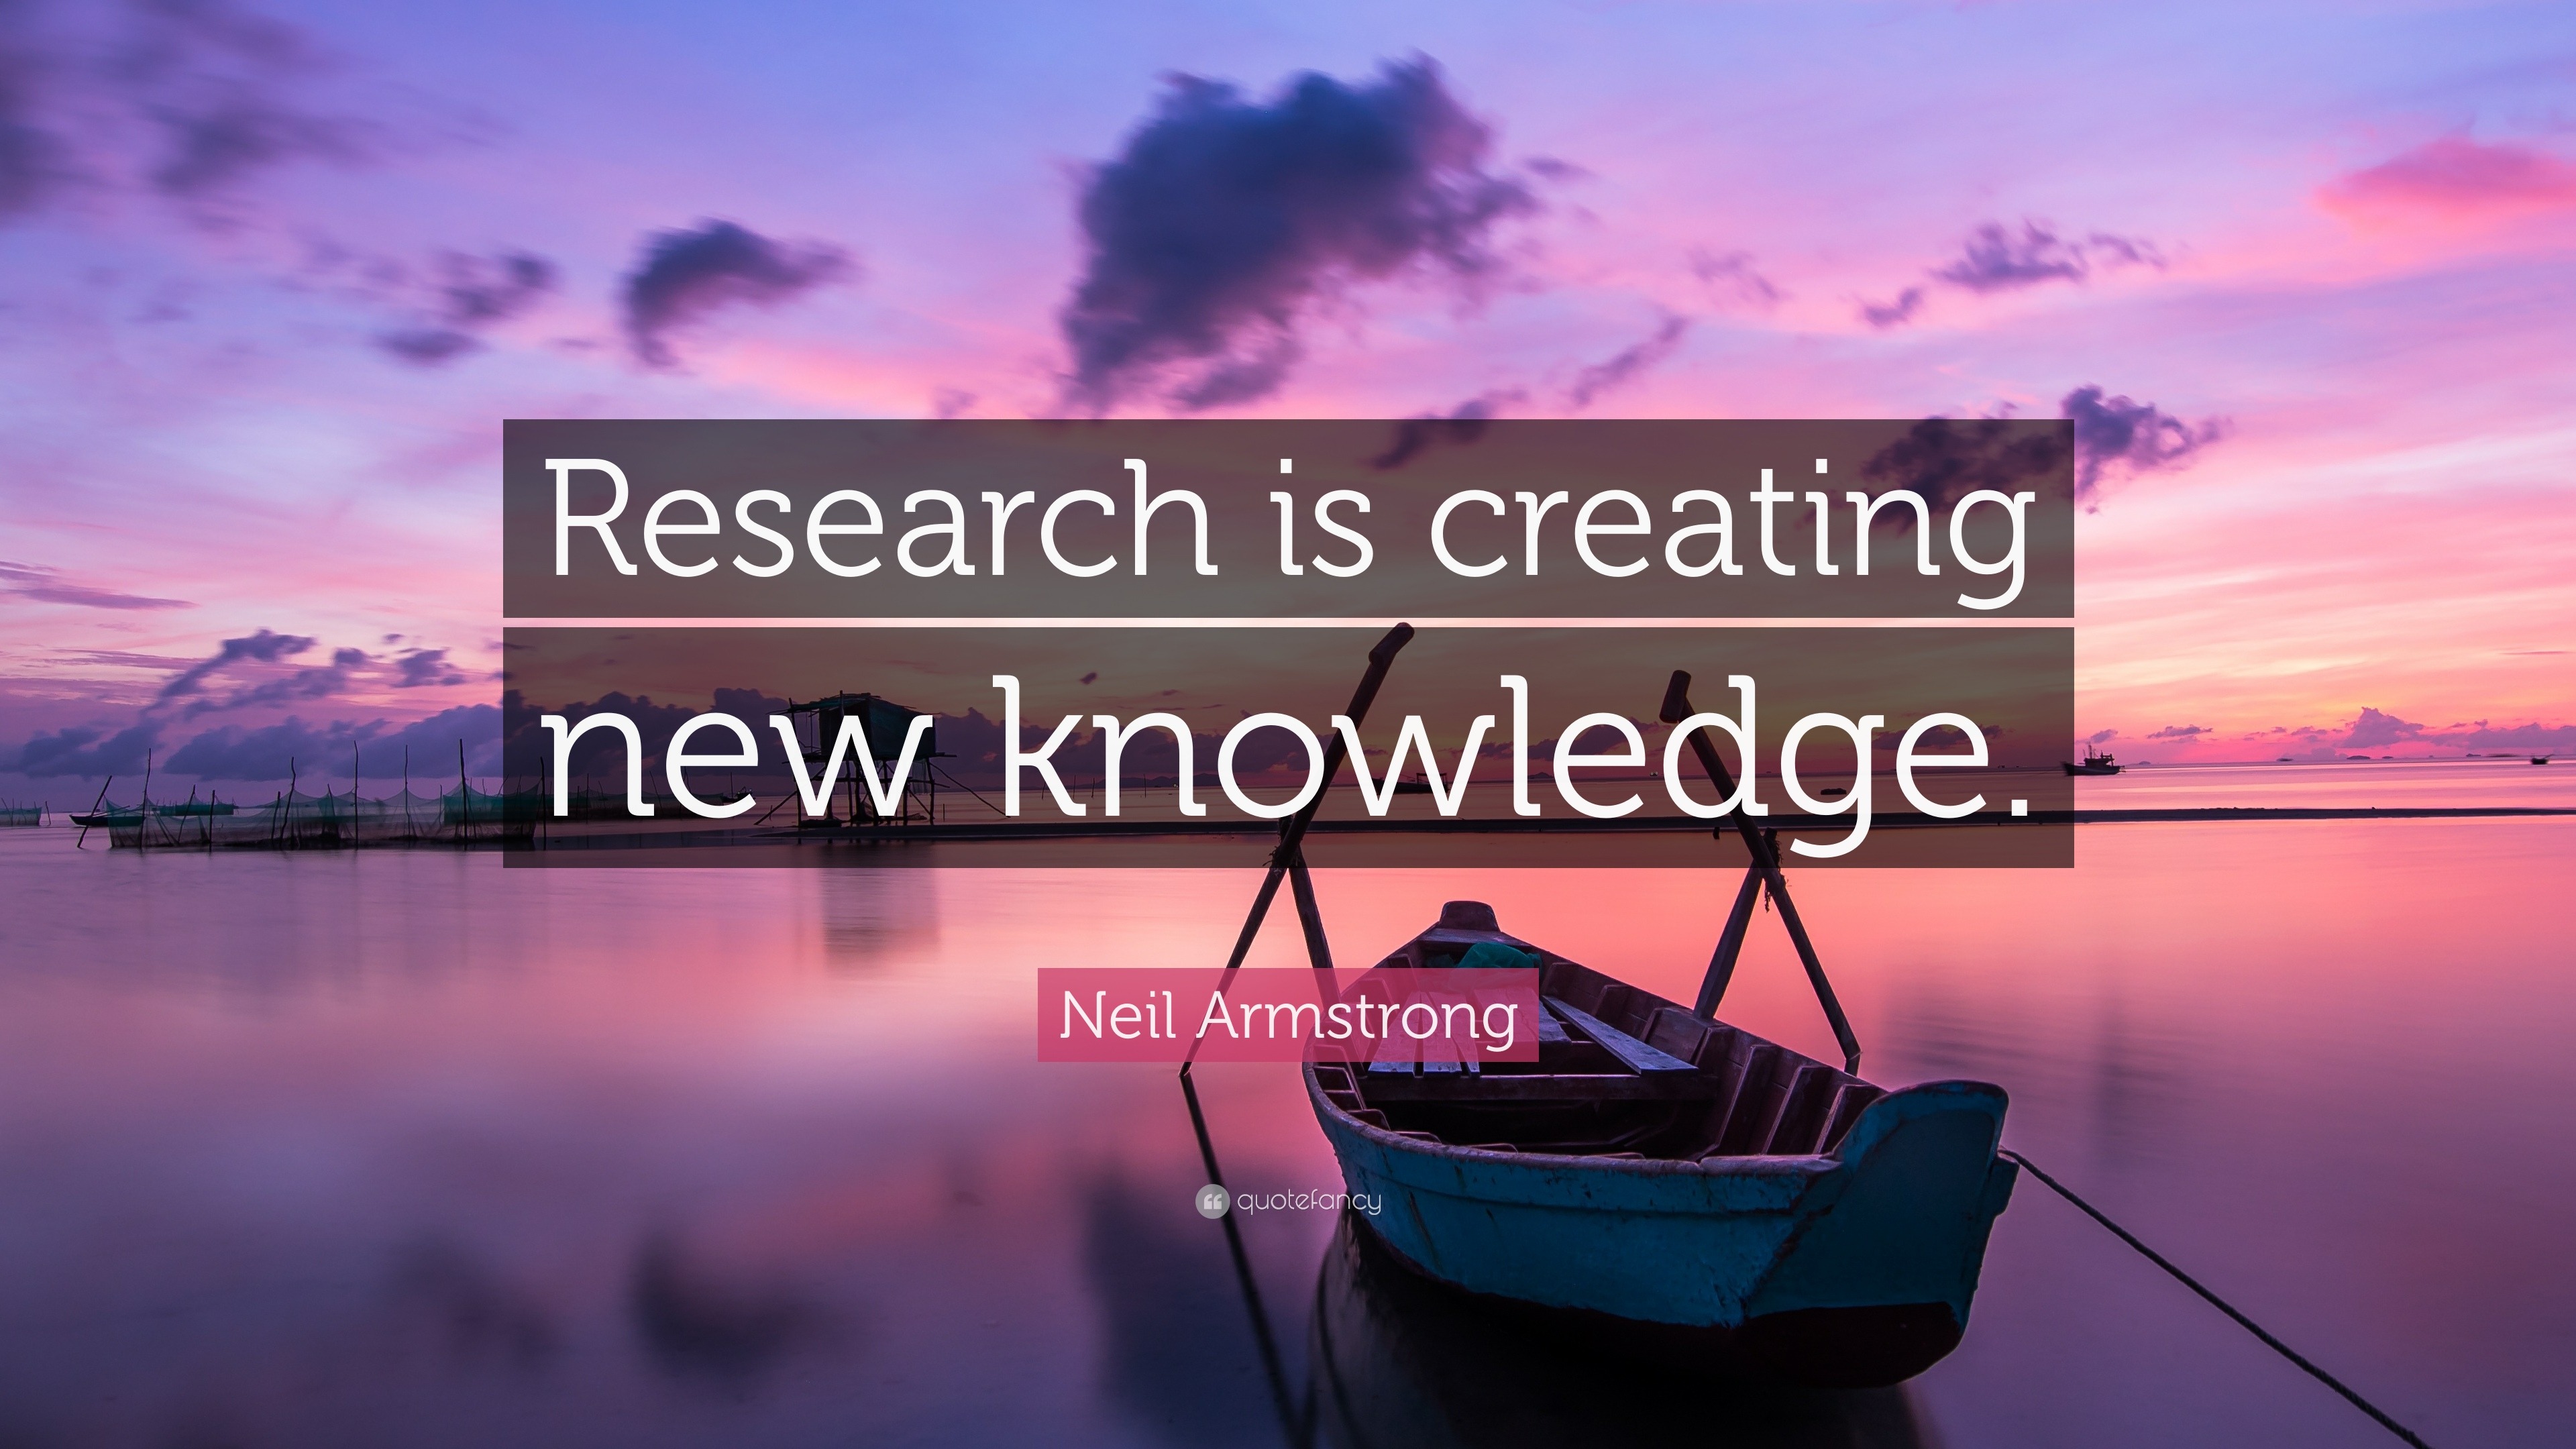 empirical research is aimed at creating new knowledge